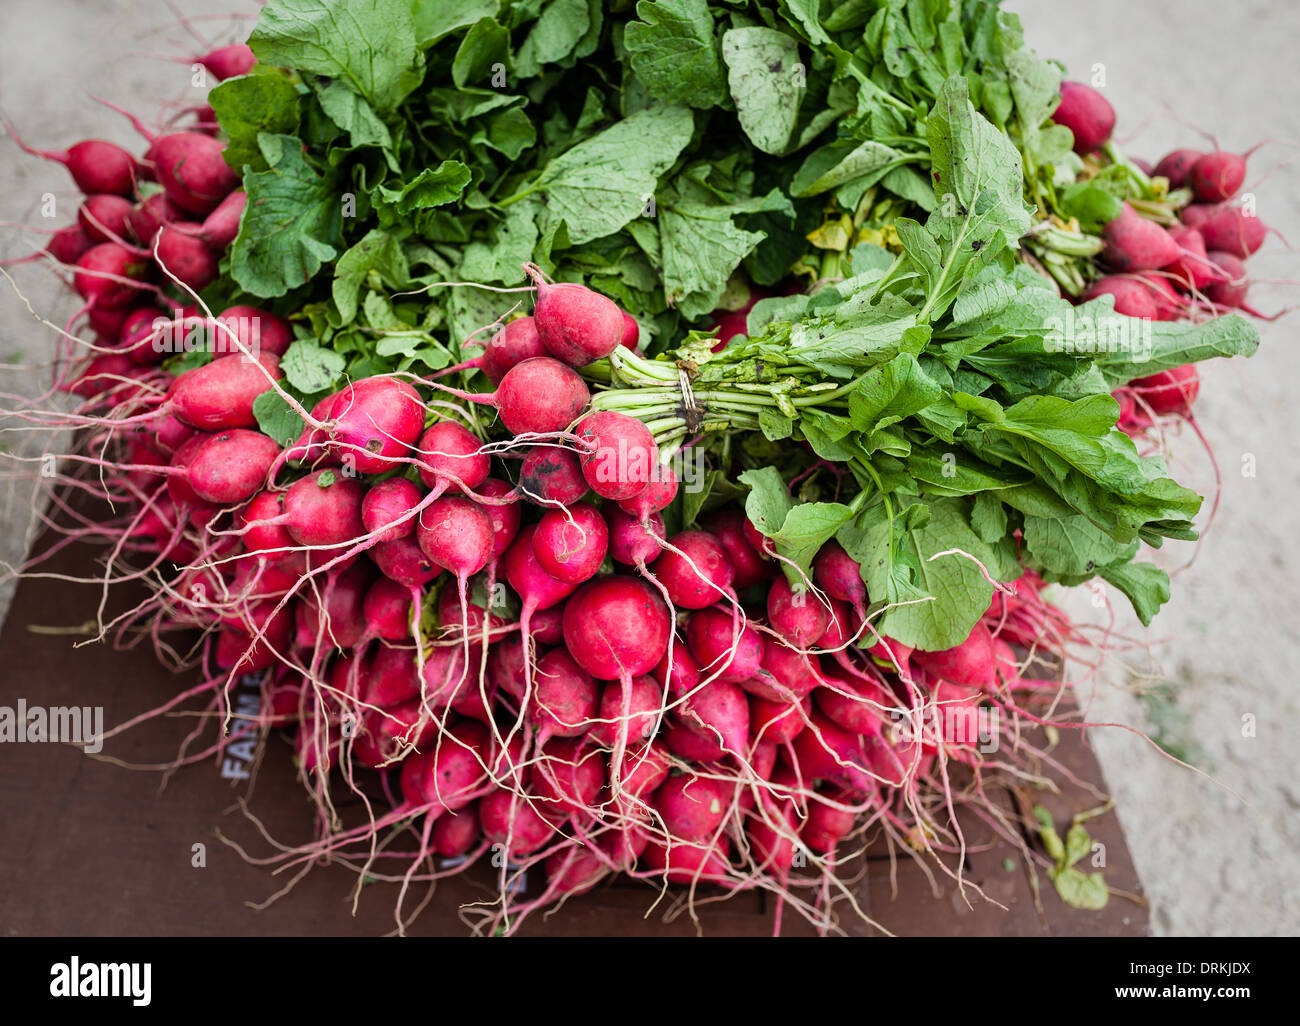 Red radishes at an outdoor market Stock Photo